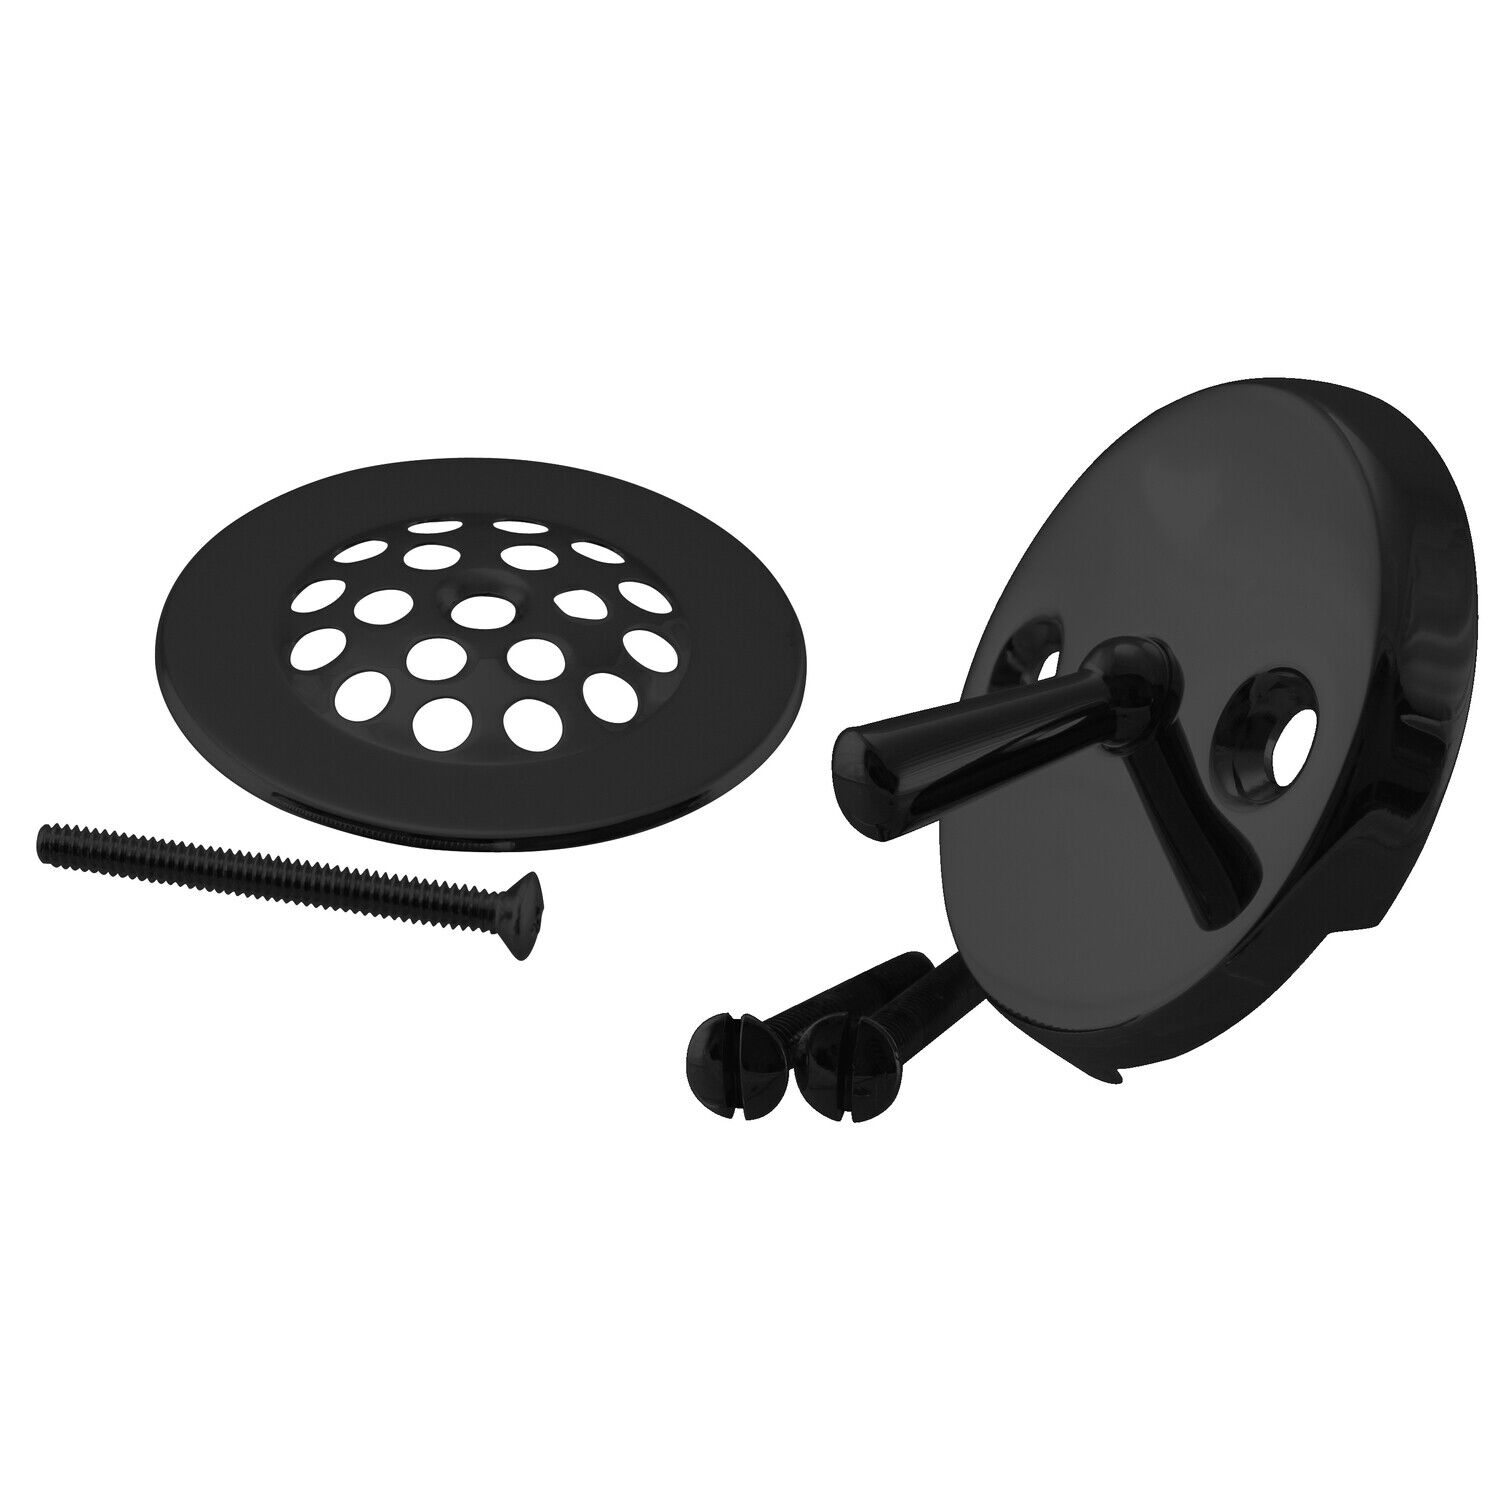 Westbrass Beehive Grid Tub Trim Grate with Trip Lever Faceplate in Matte Black